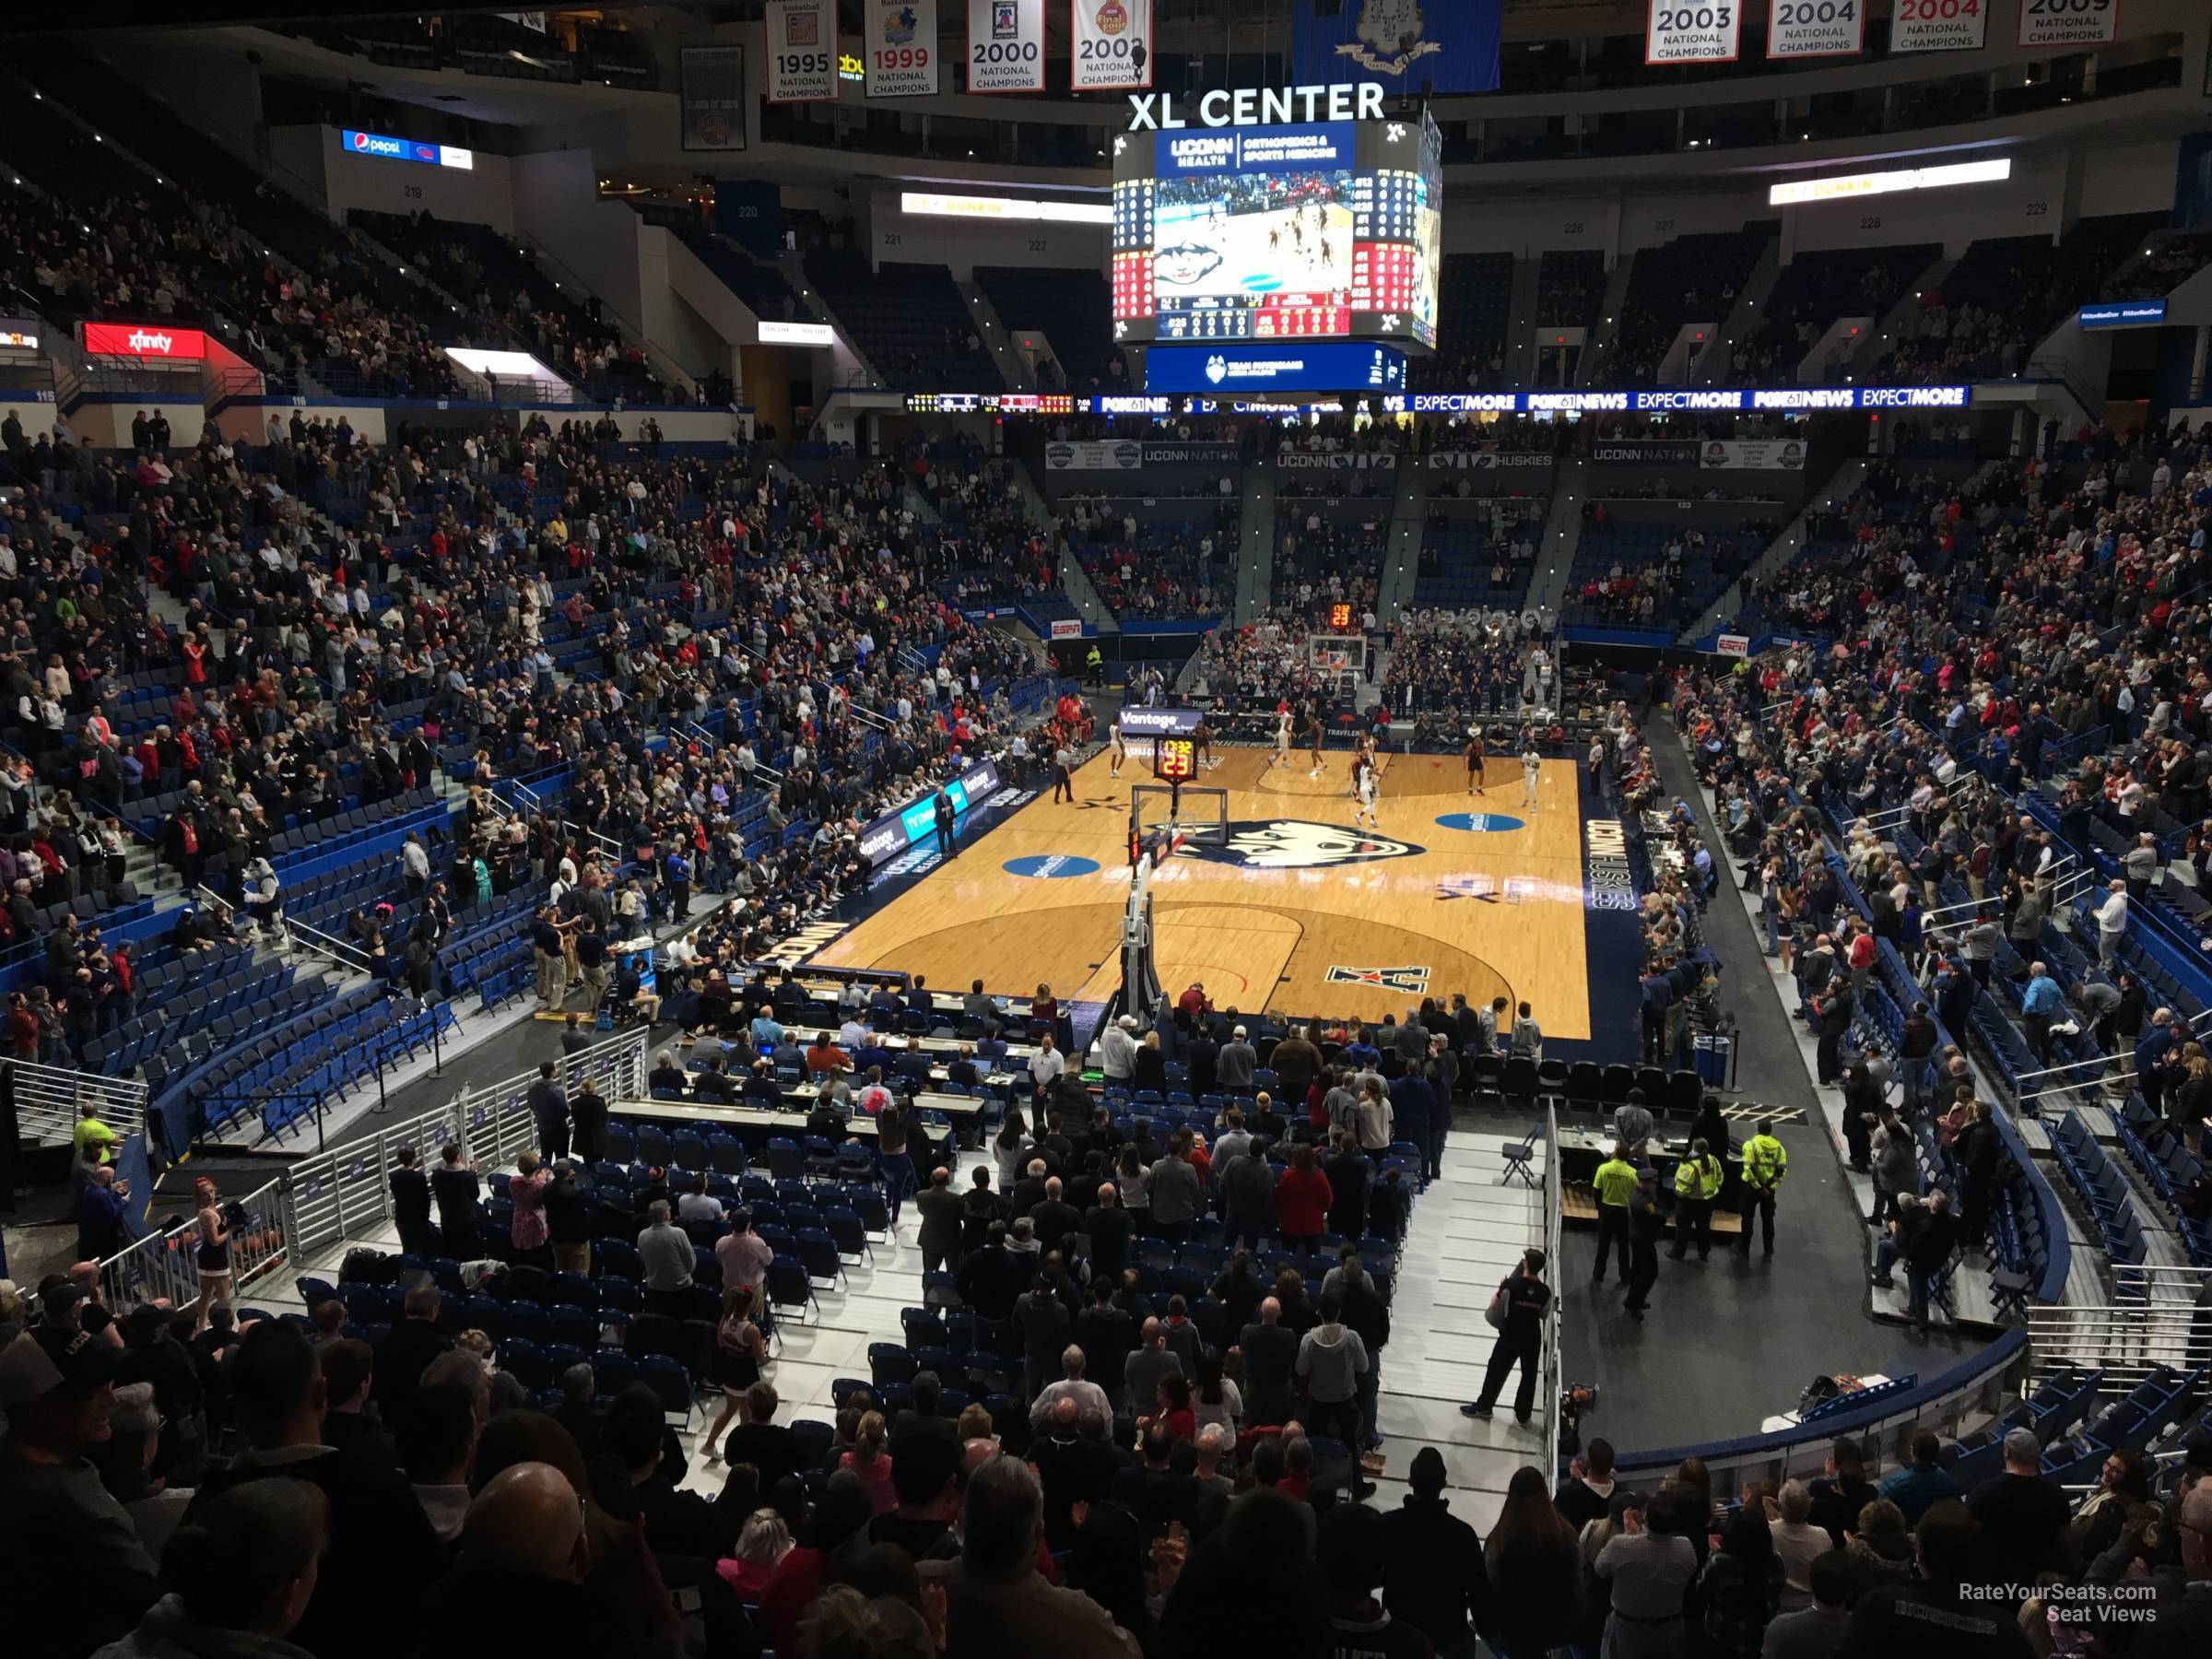 section 109, row s seat view  - xl center